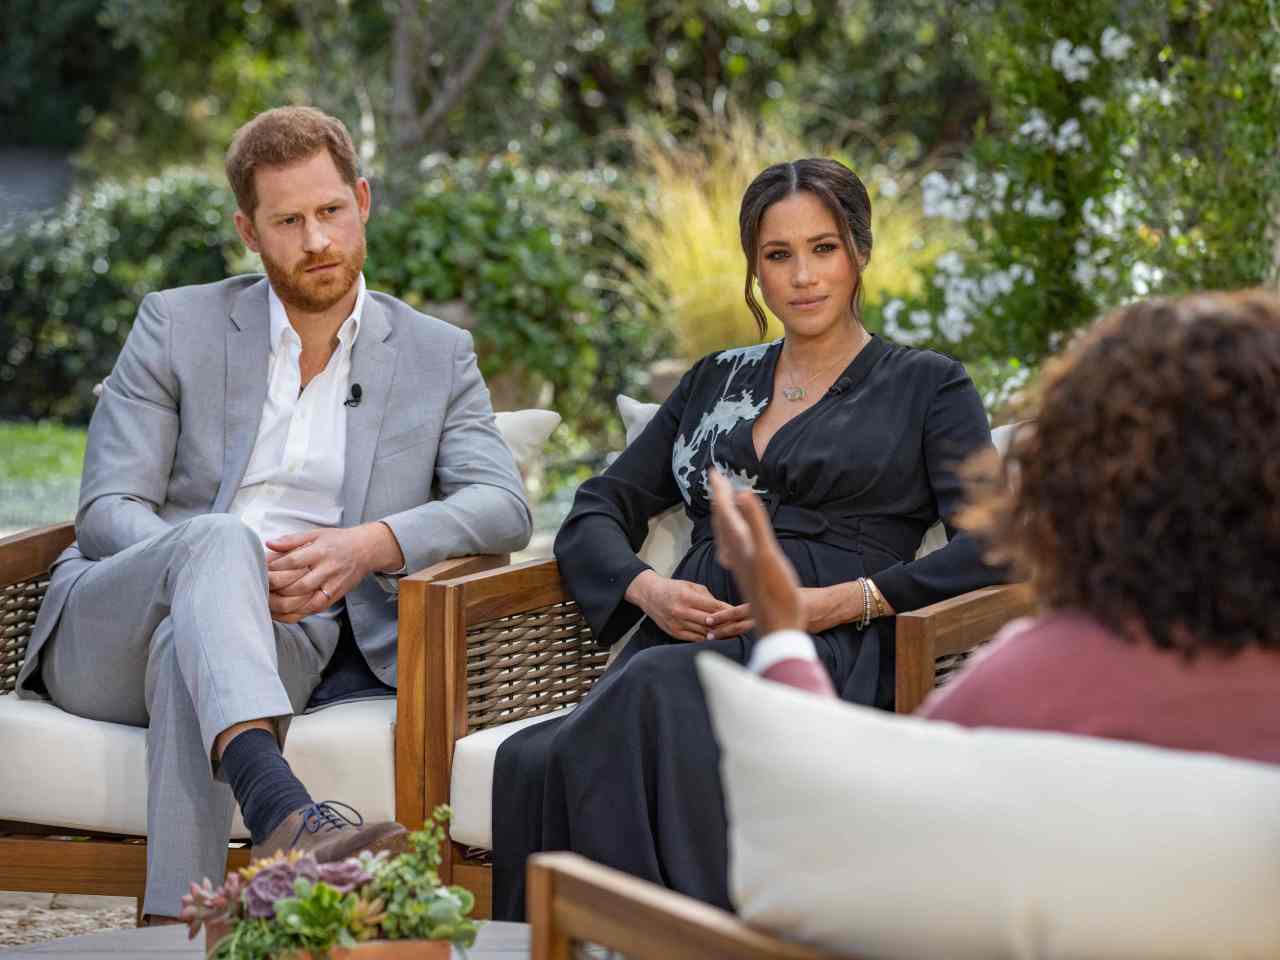 This undated image released Sunday courtesy of Harpo Productions shows Britain's Prince Harry (L) and his wife Meghan (C), Duchess of Sussex, in a conversation with US television host Oprah Winfrey. (AFP-Yonhap)